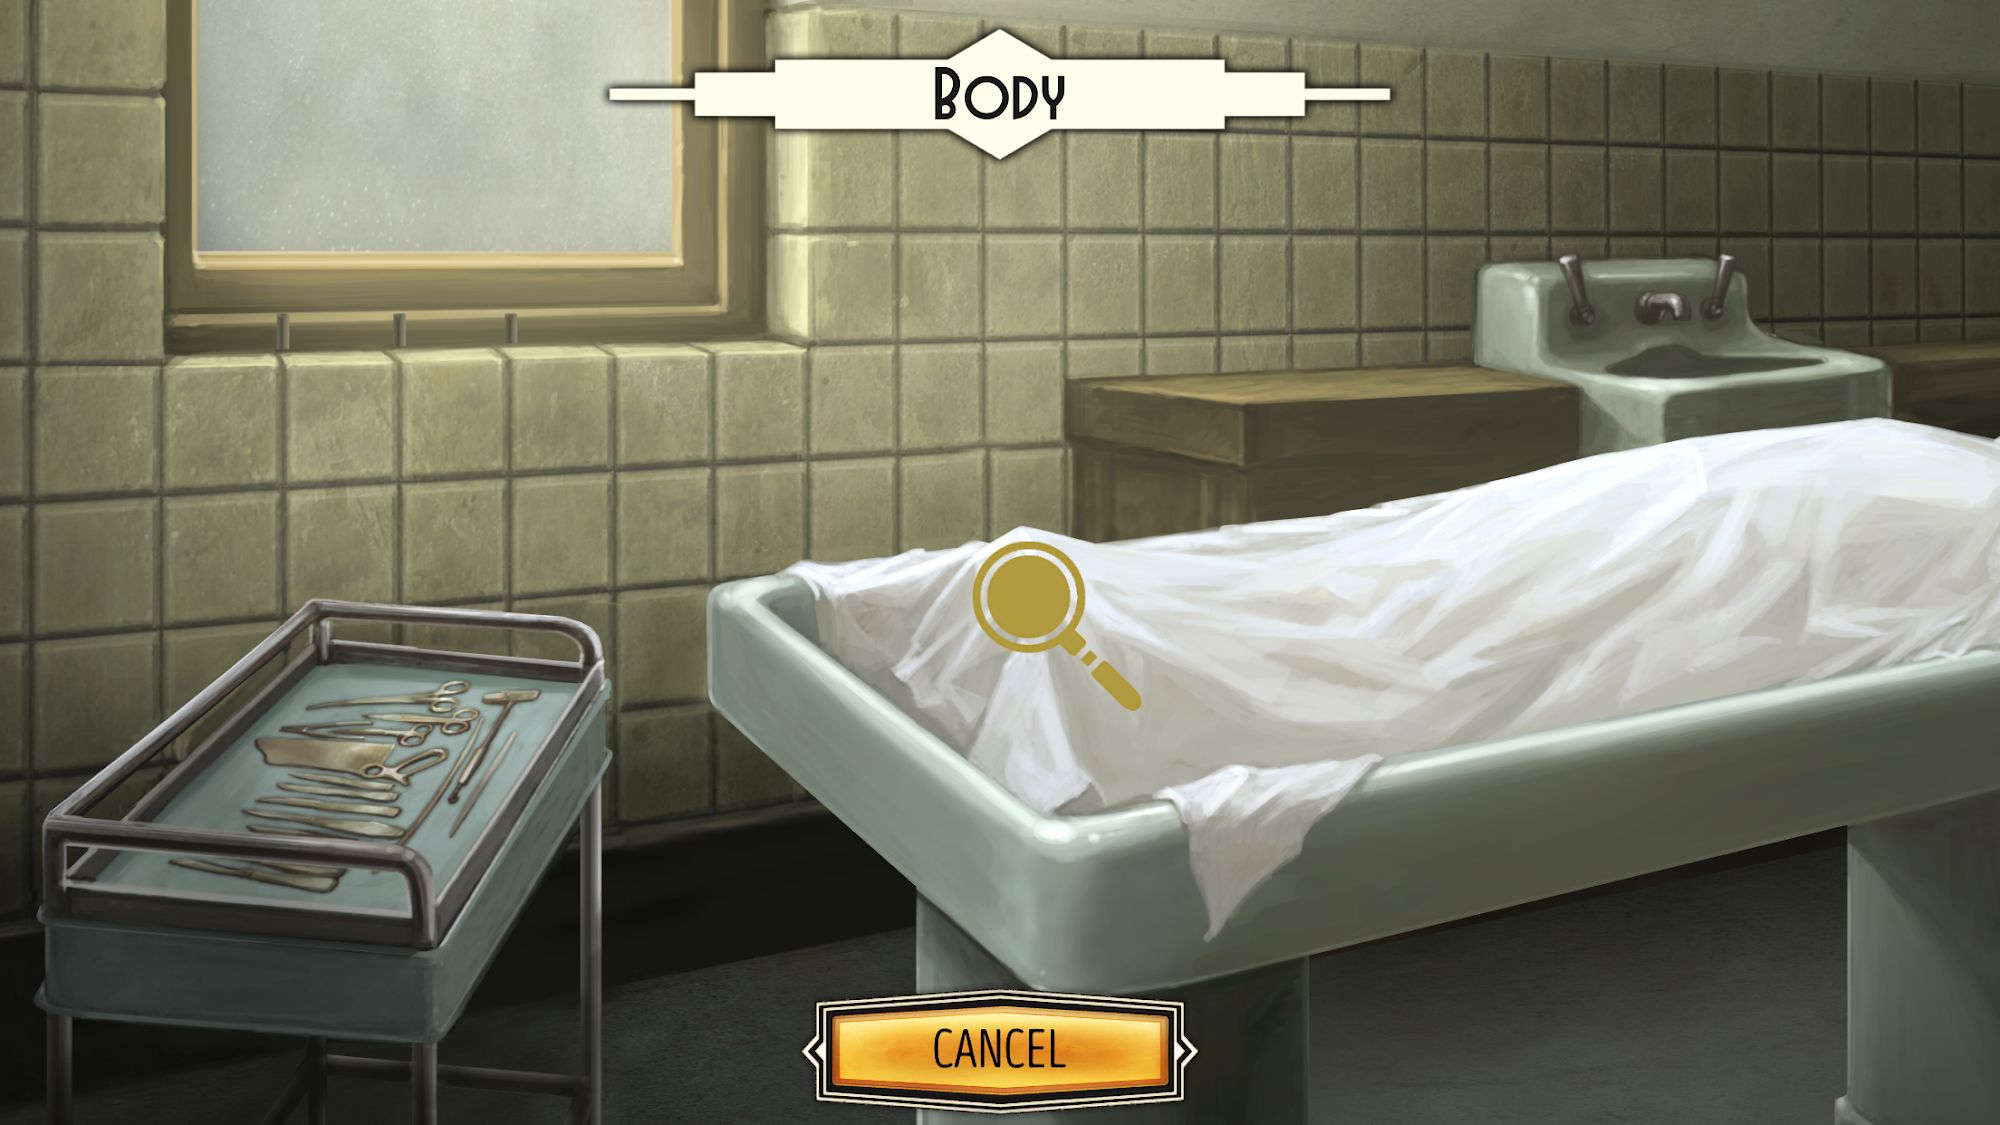 Miss Fisher's Murder Mysteries - detective game for Android